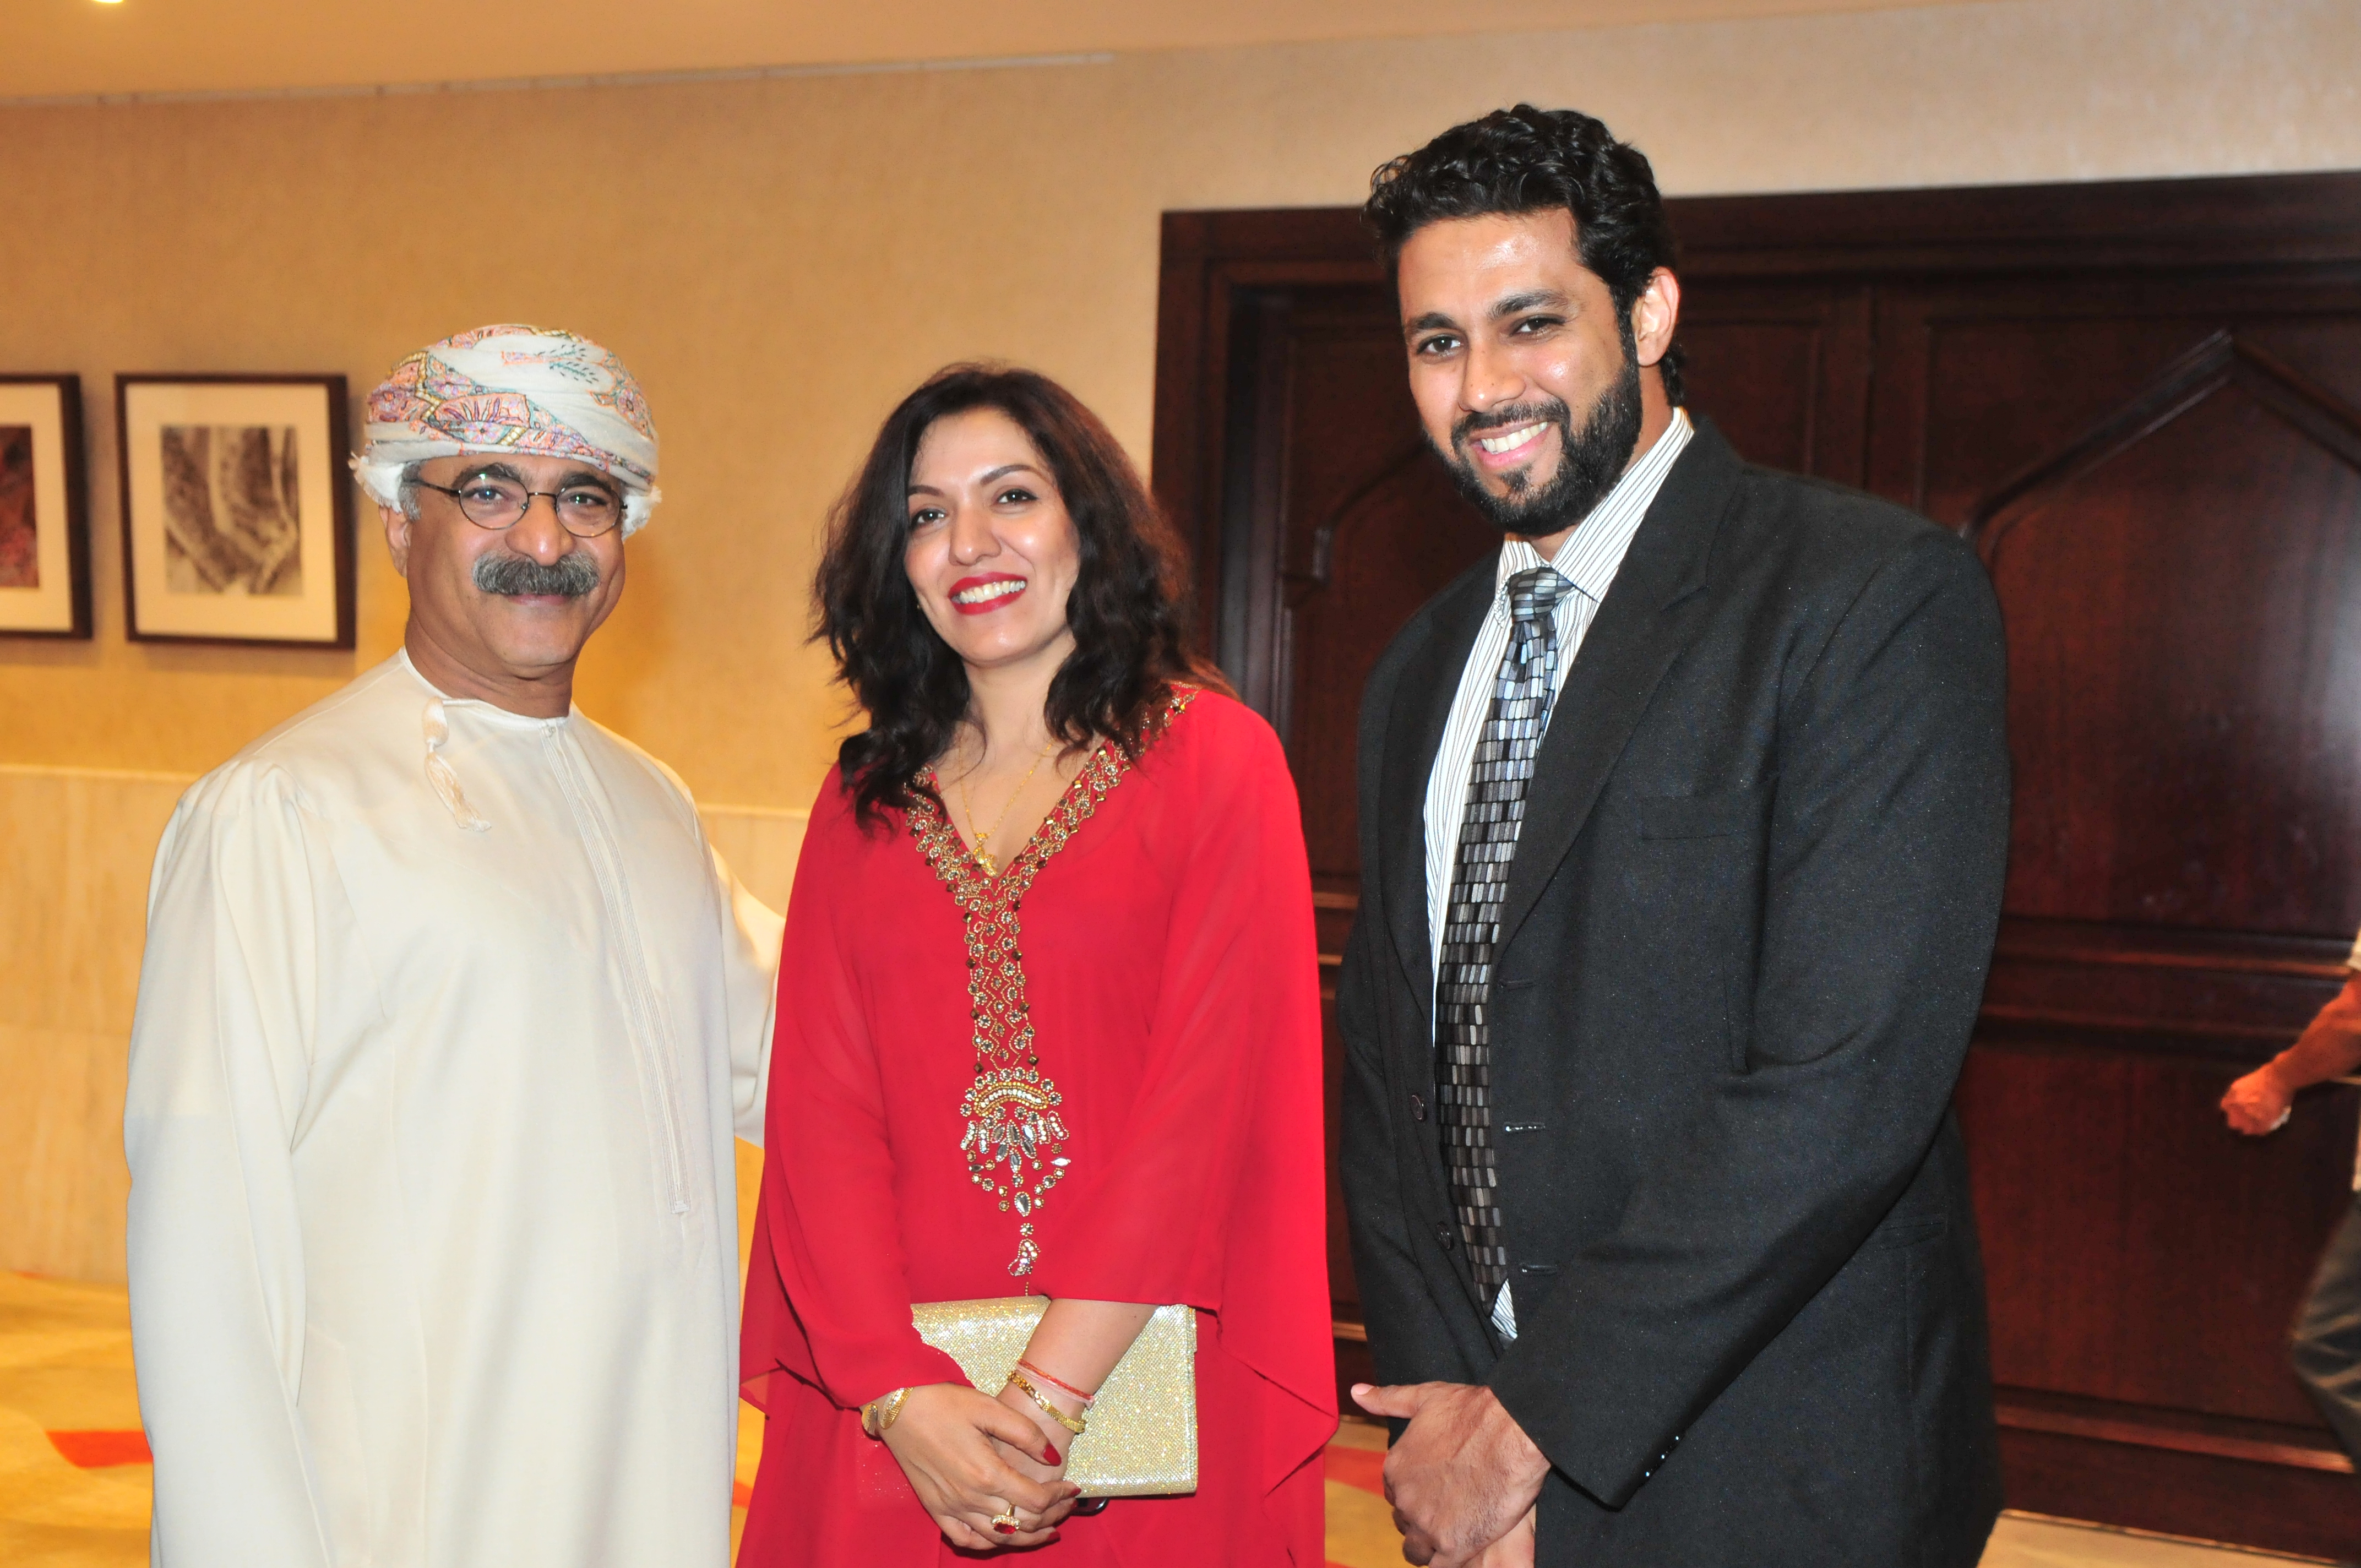 At the launch of 2015 edition of Tribute with Saleh Zakwani, executive chairman, Apex Press and Publishing